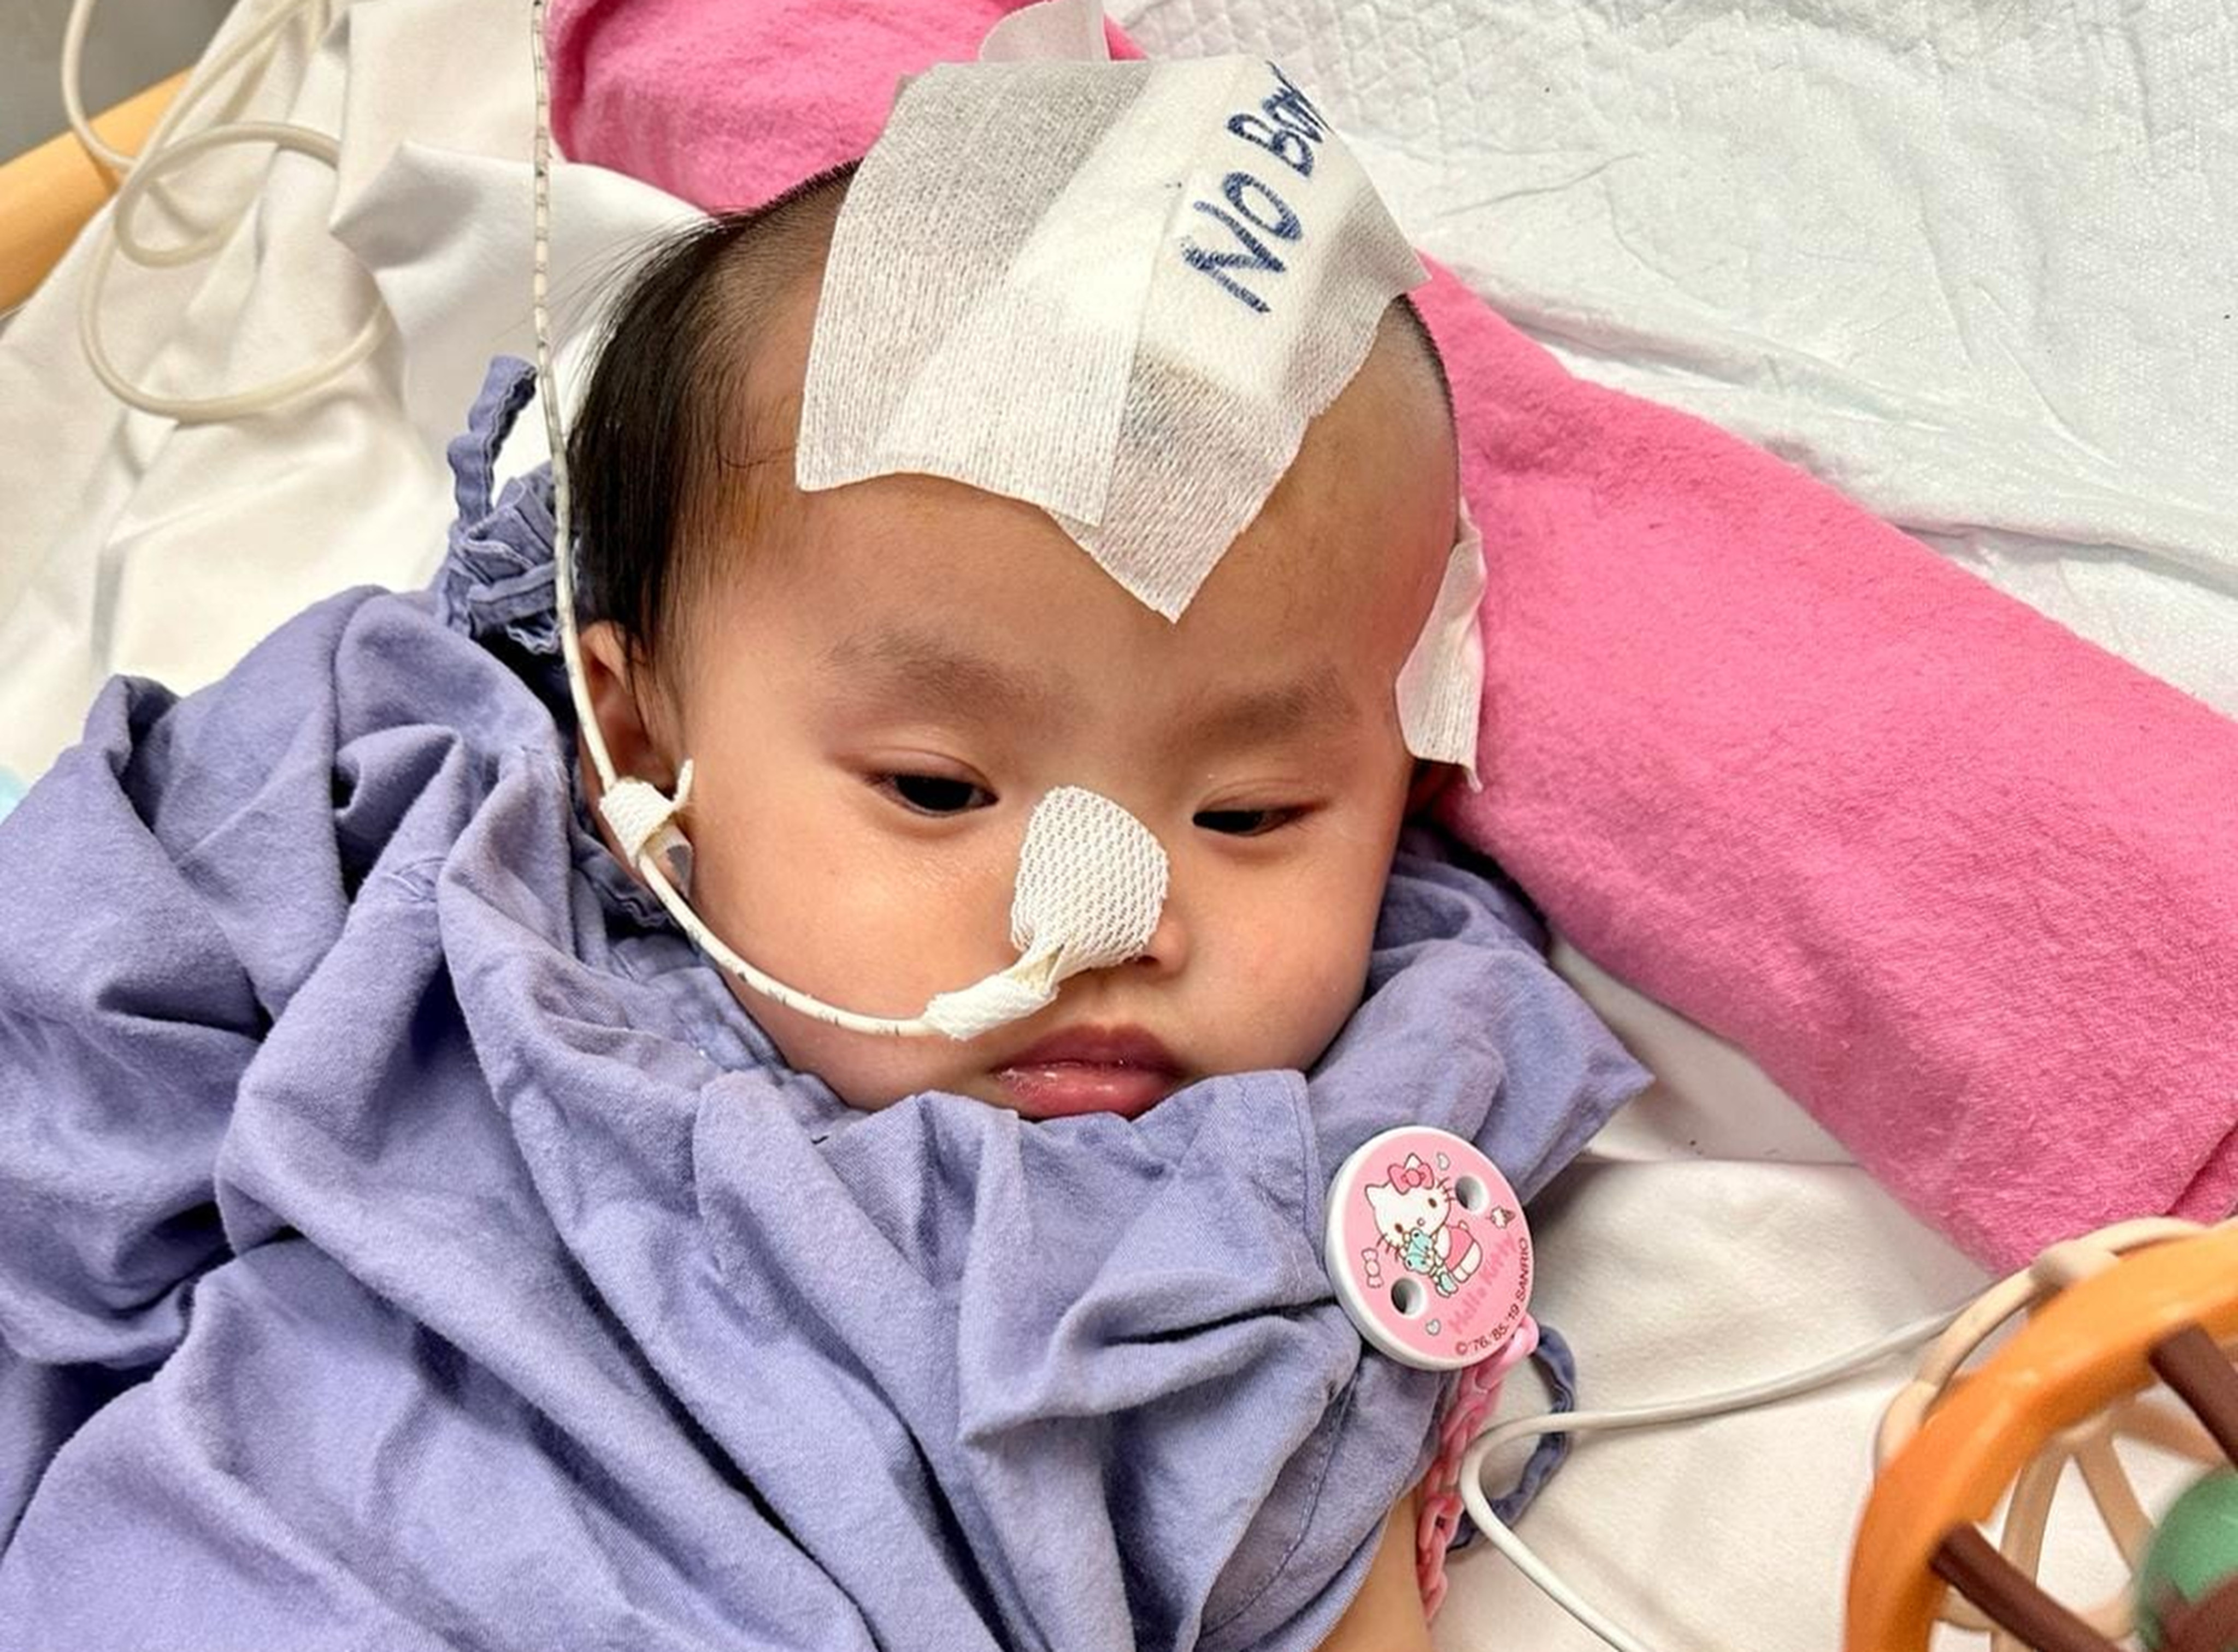 ‘Little Suet-yee’ in hospital. Her vision has also been impaired following major bleeding in her eyes from the injuries she suffered. Photo: Facebook/香港關懷力量